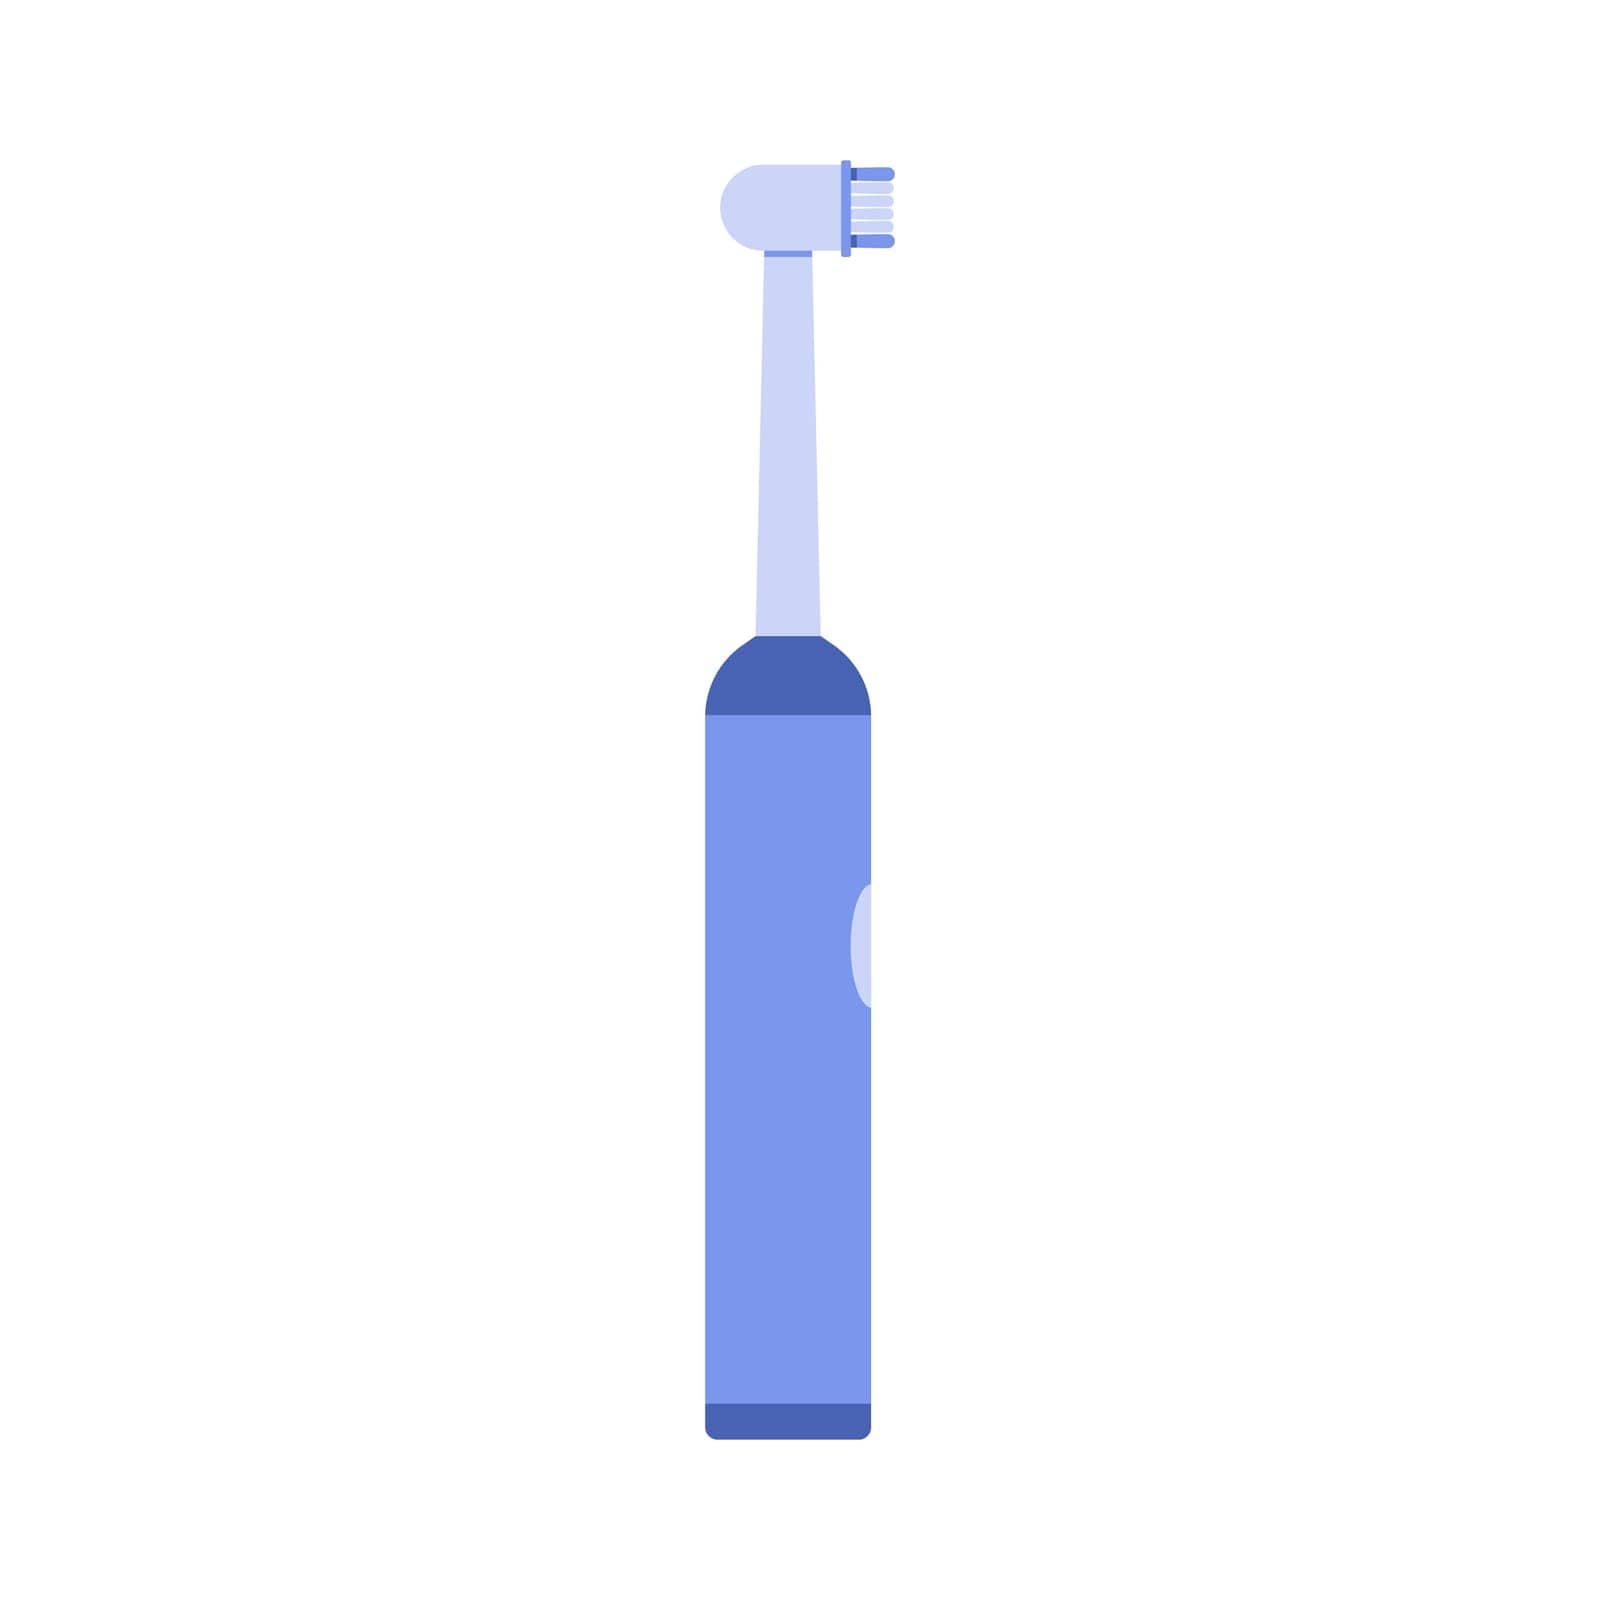 Electric toothbrush with bristle on head, dental equipment to brush teeth vector illustration